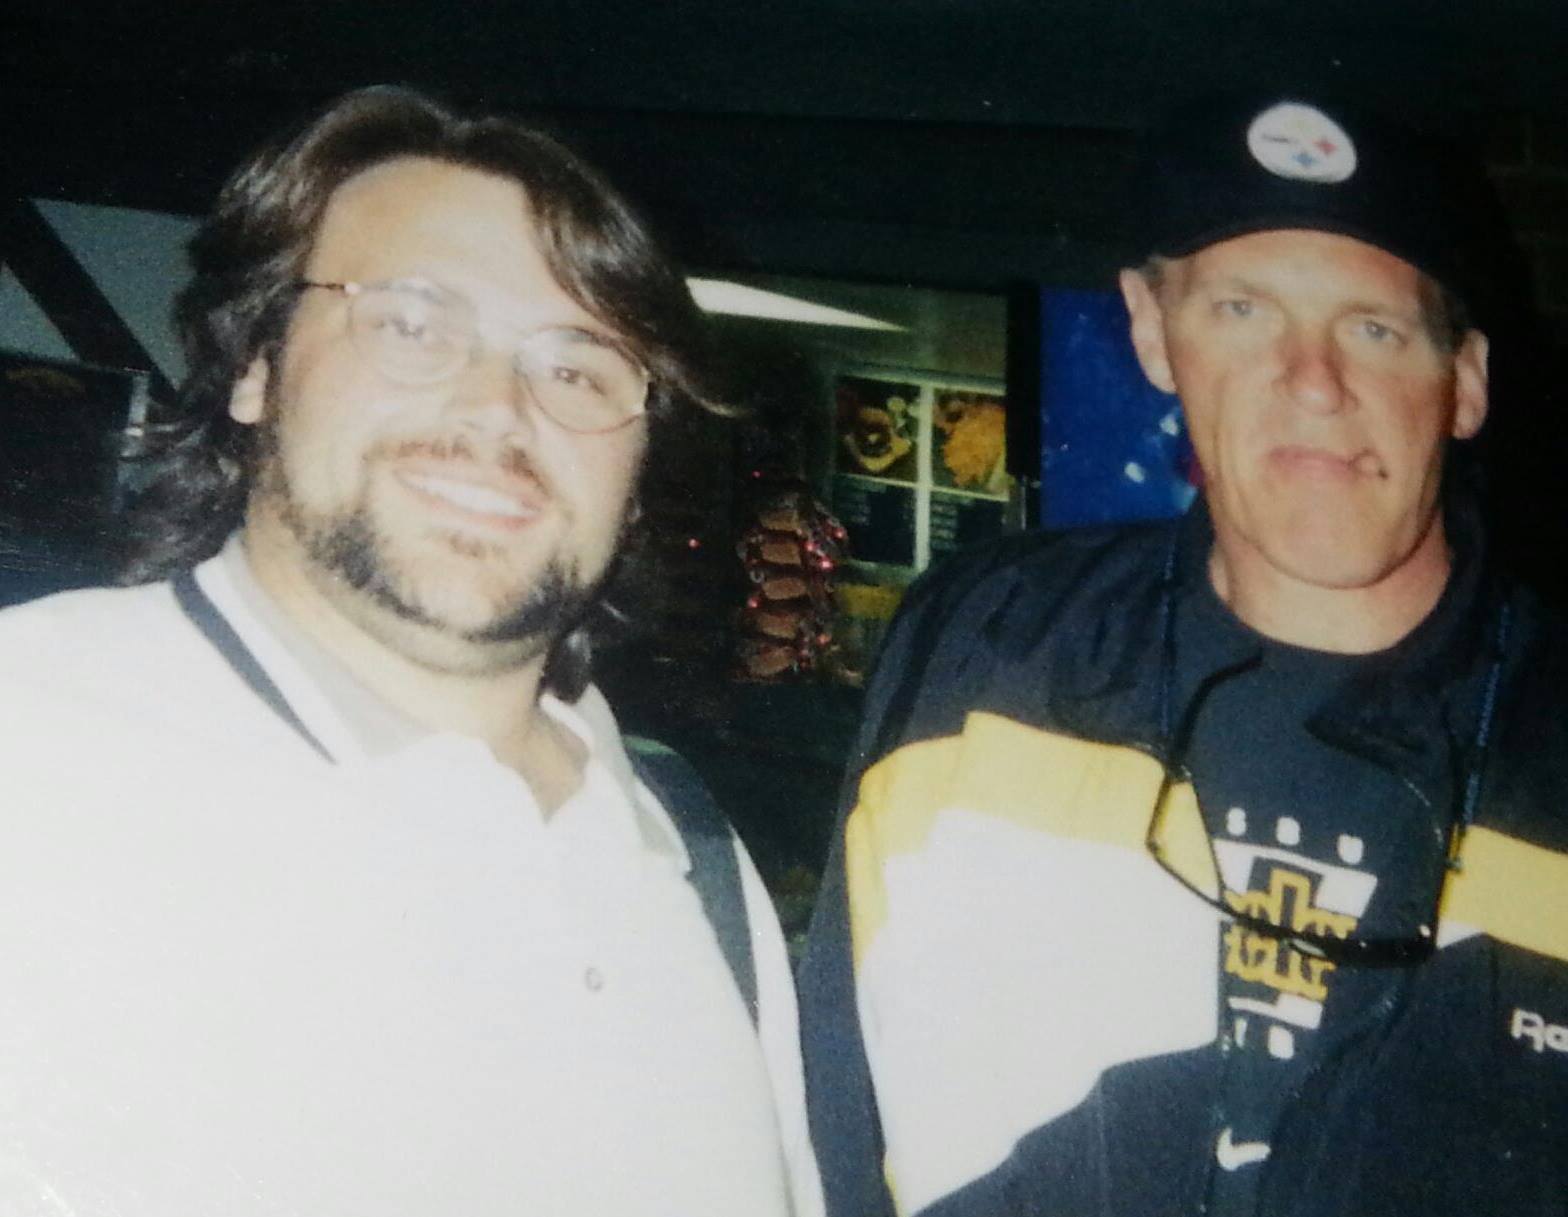 Me and Jack Lambert at a Steelers Super Bowl reunion show.